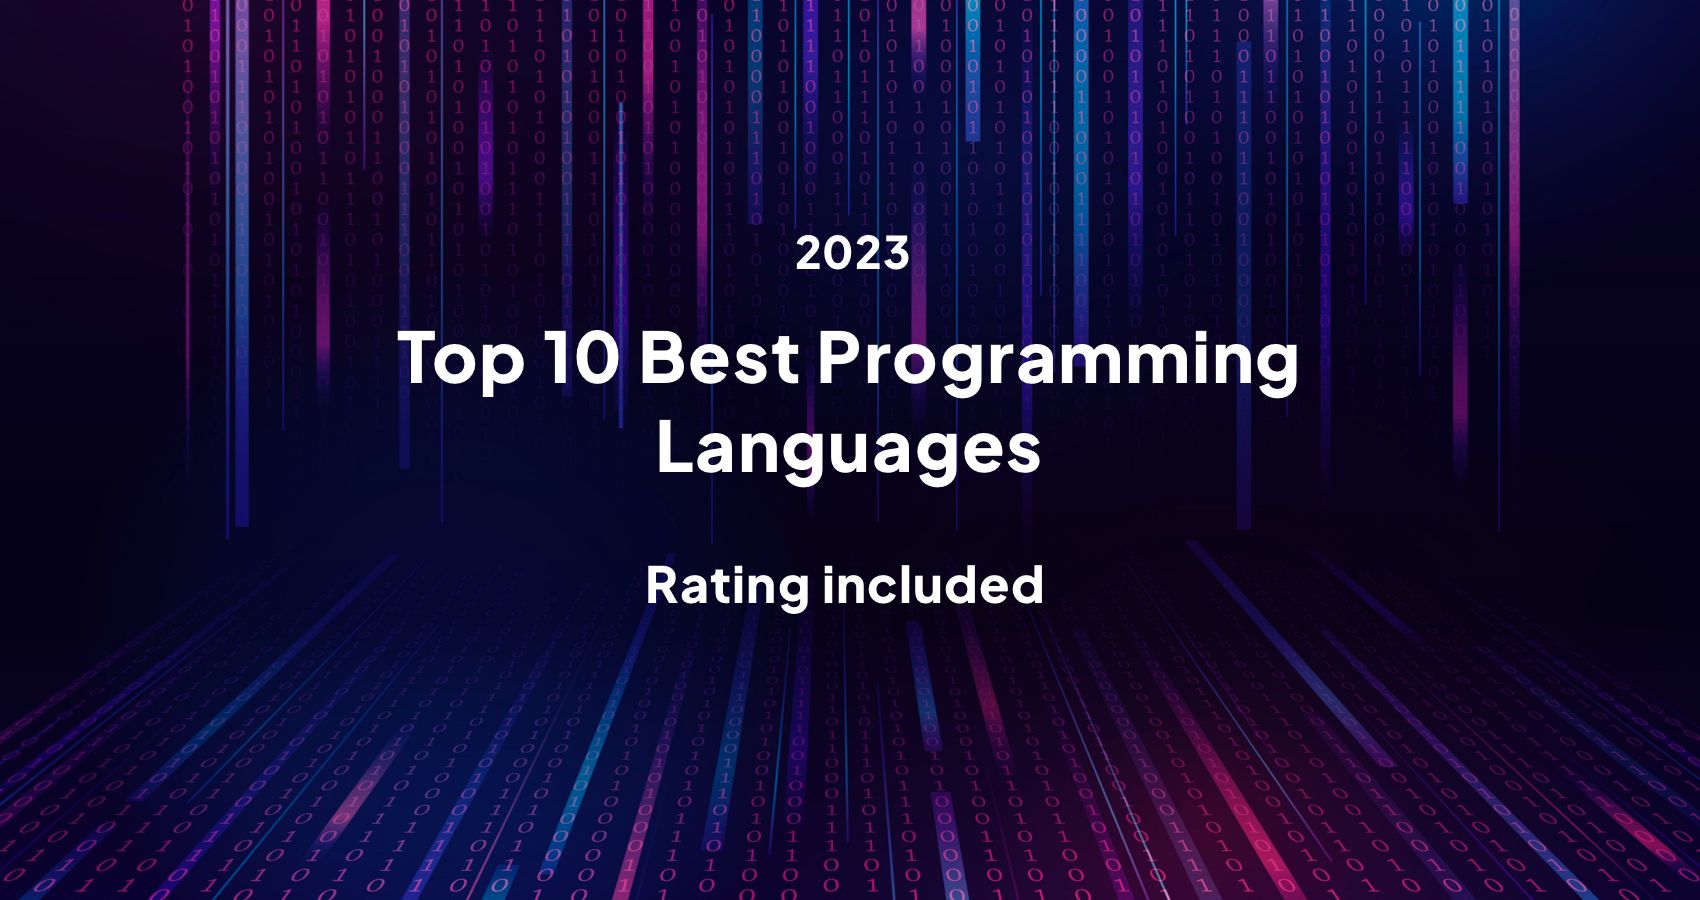 top-10-best-programming-languages-for-2023-rating-included